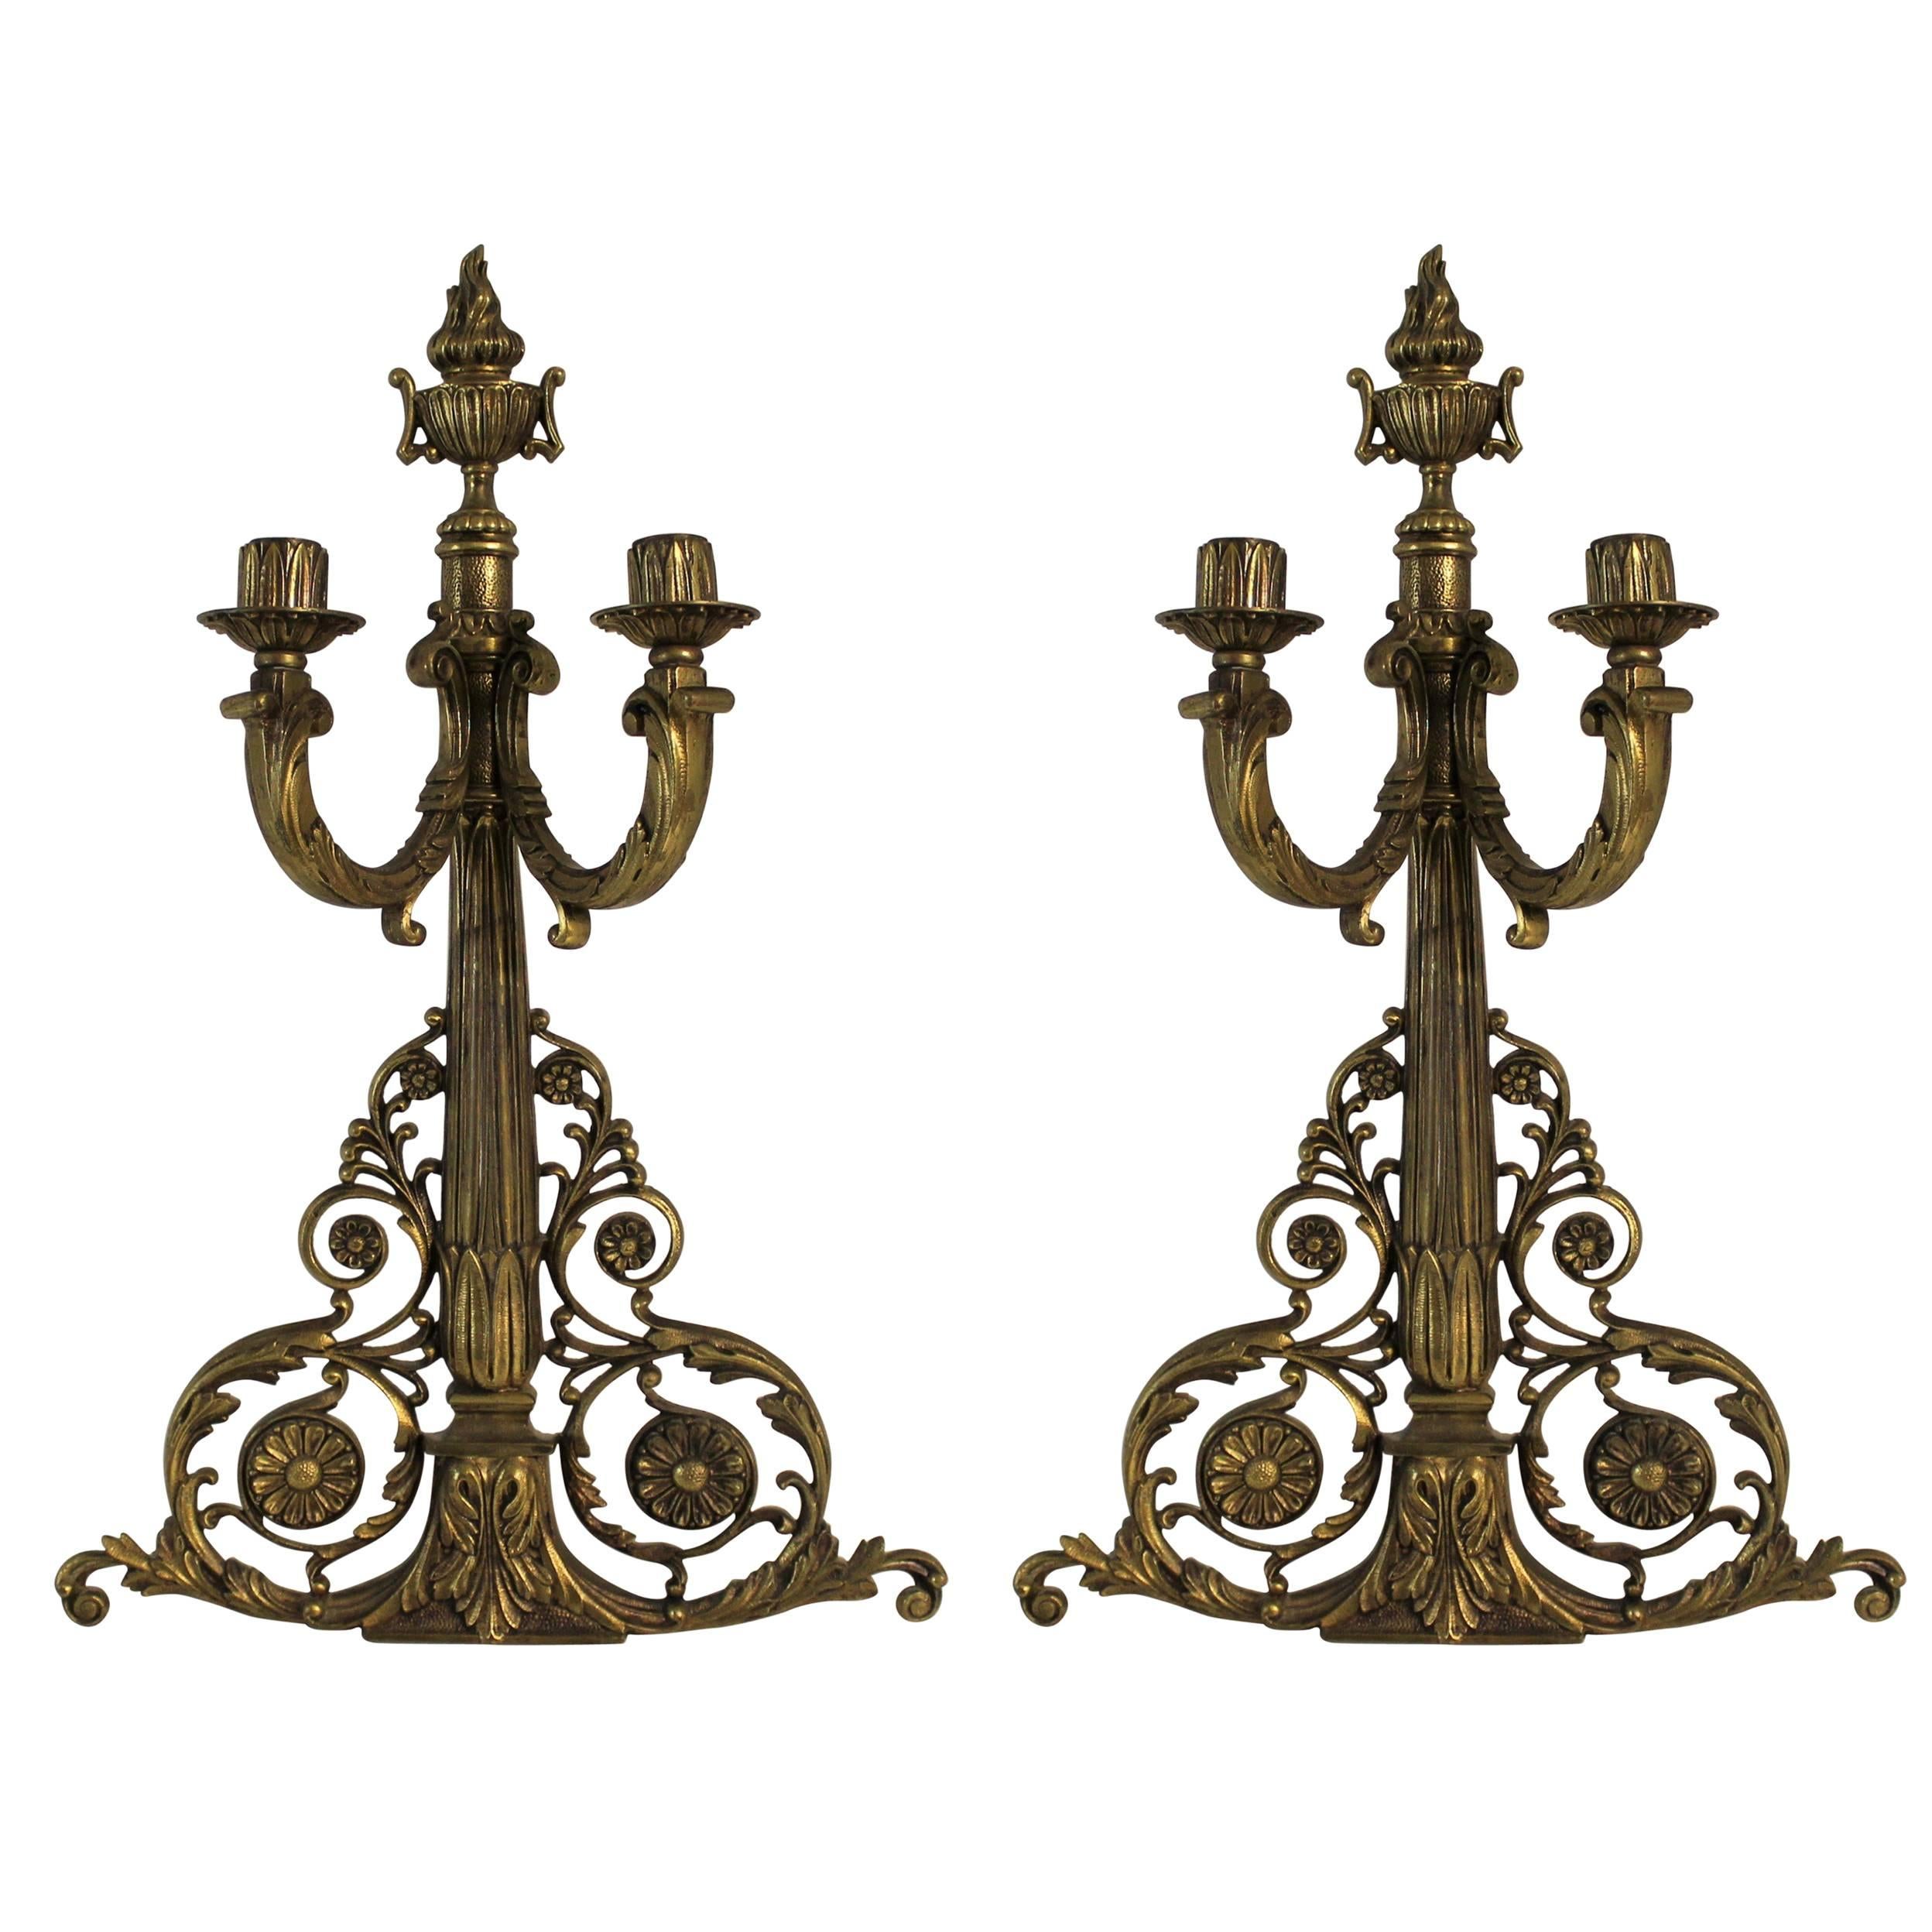 Pair of French Bronze Wall Sconce Candleholders